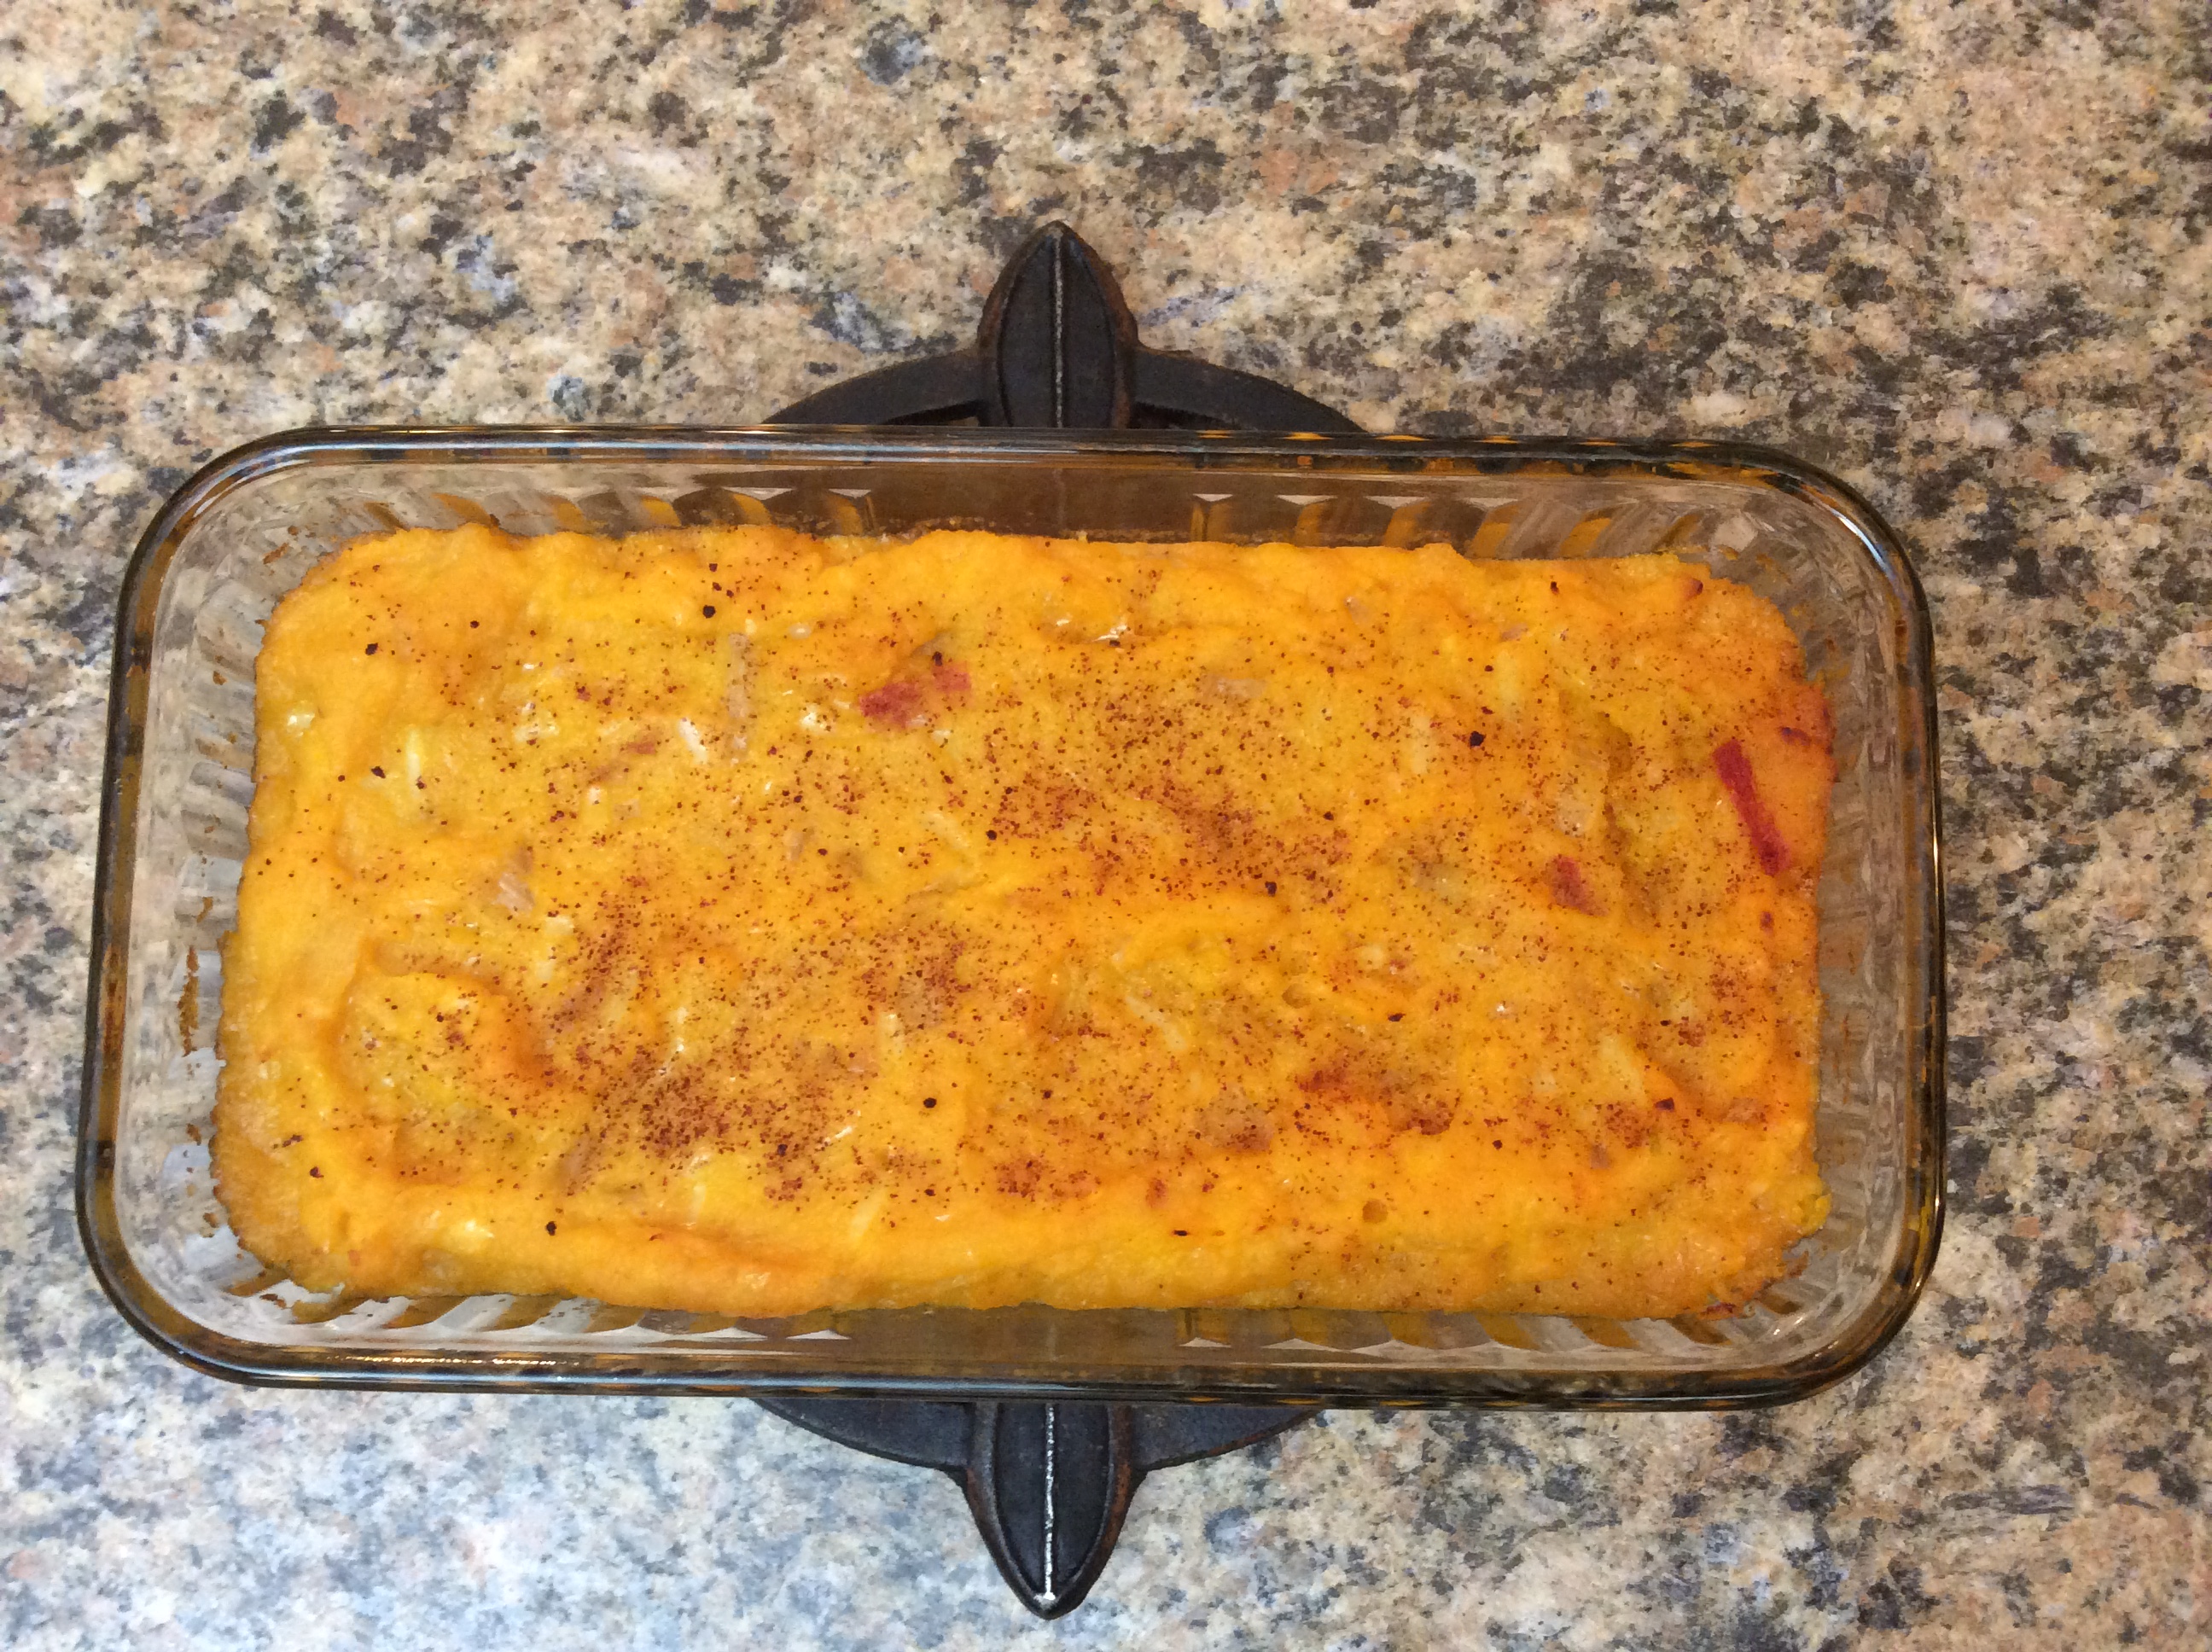 Fresh out of the oven: fluffy mashed squash.